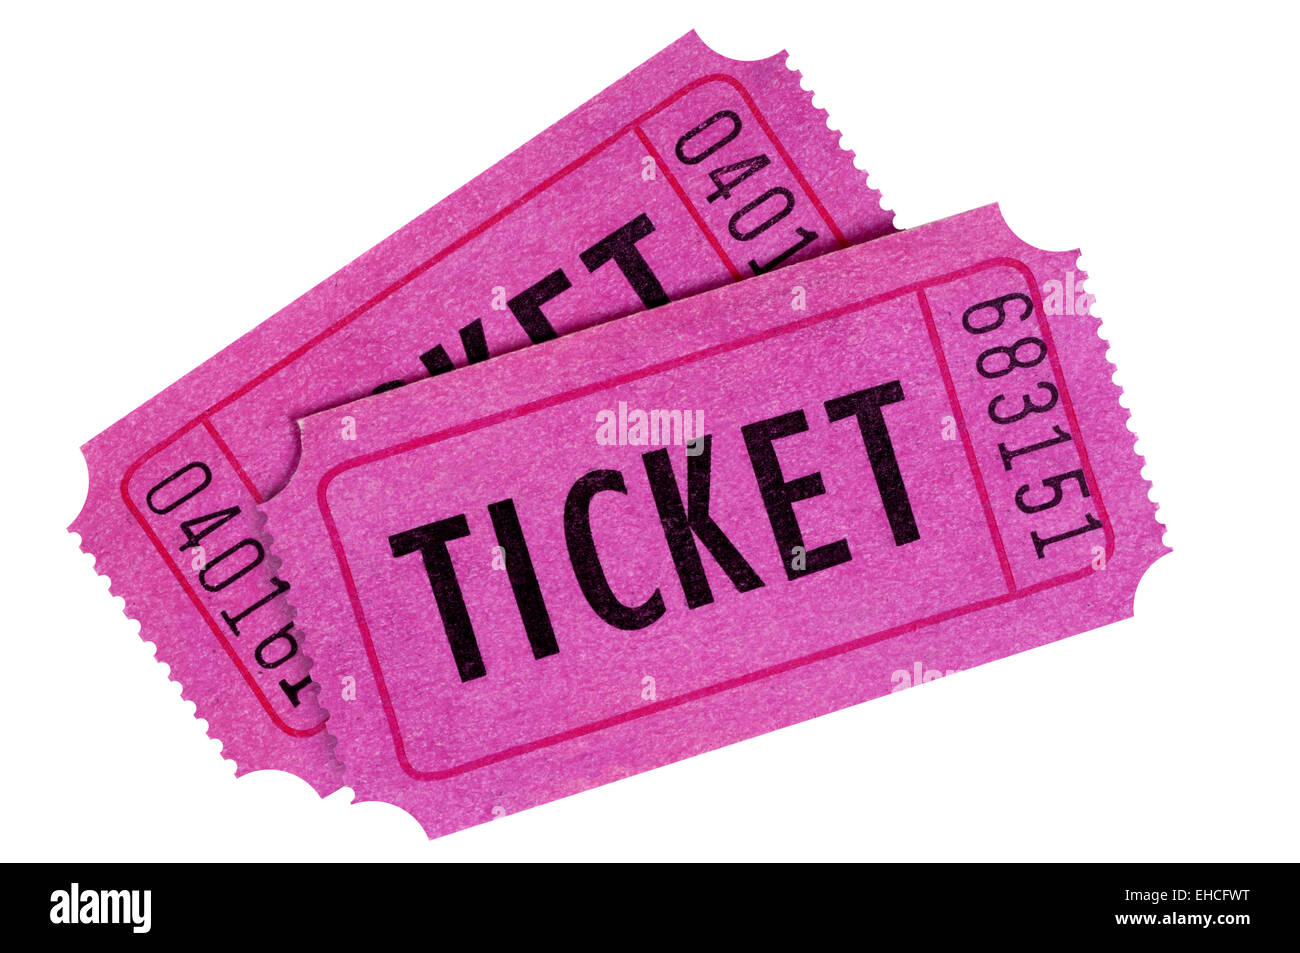 Two purple or pink raffle or movie tickets isolated on a white background. Stock Photo